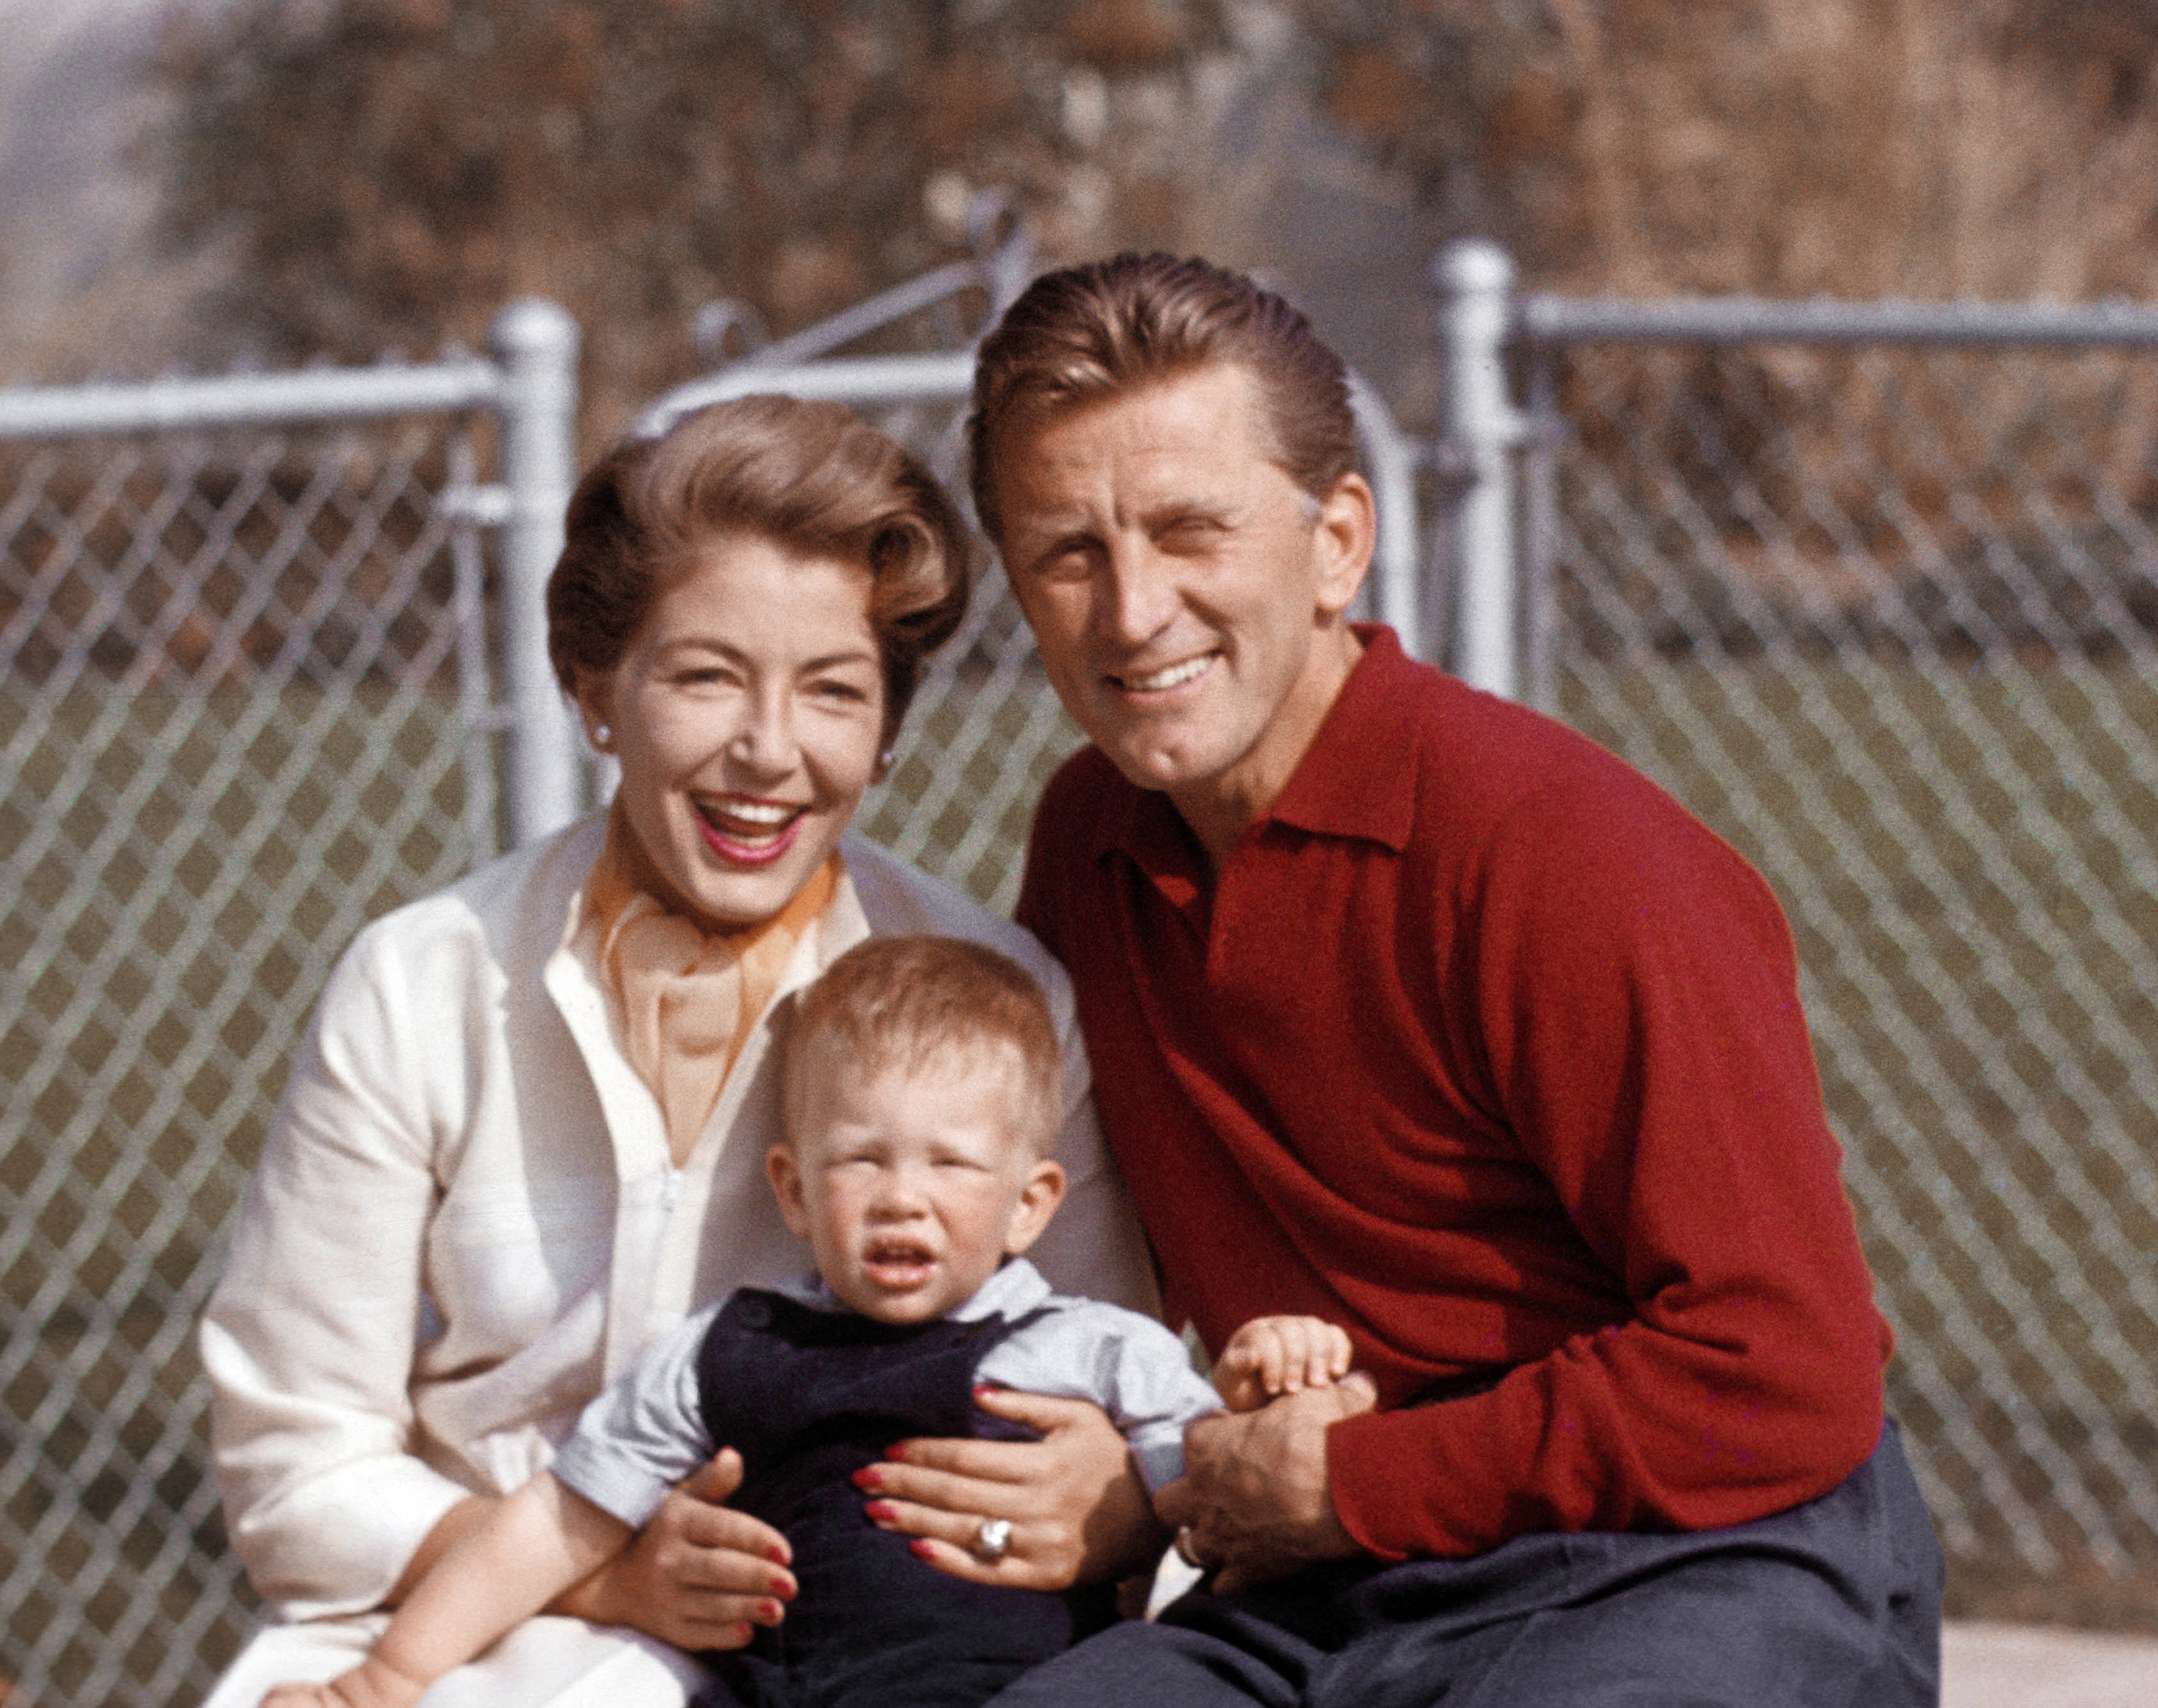 Kirk Douglas at home with his spouse Anne Douglas their son Peter Vincent Douglas in Los Angeles on February 14, 1957. | Photo: Getty Images